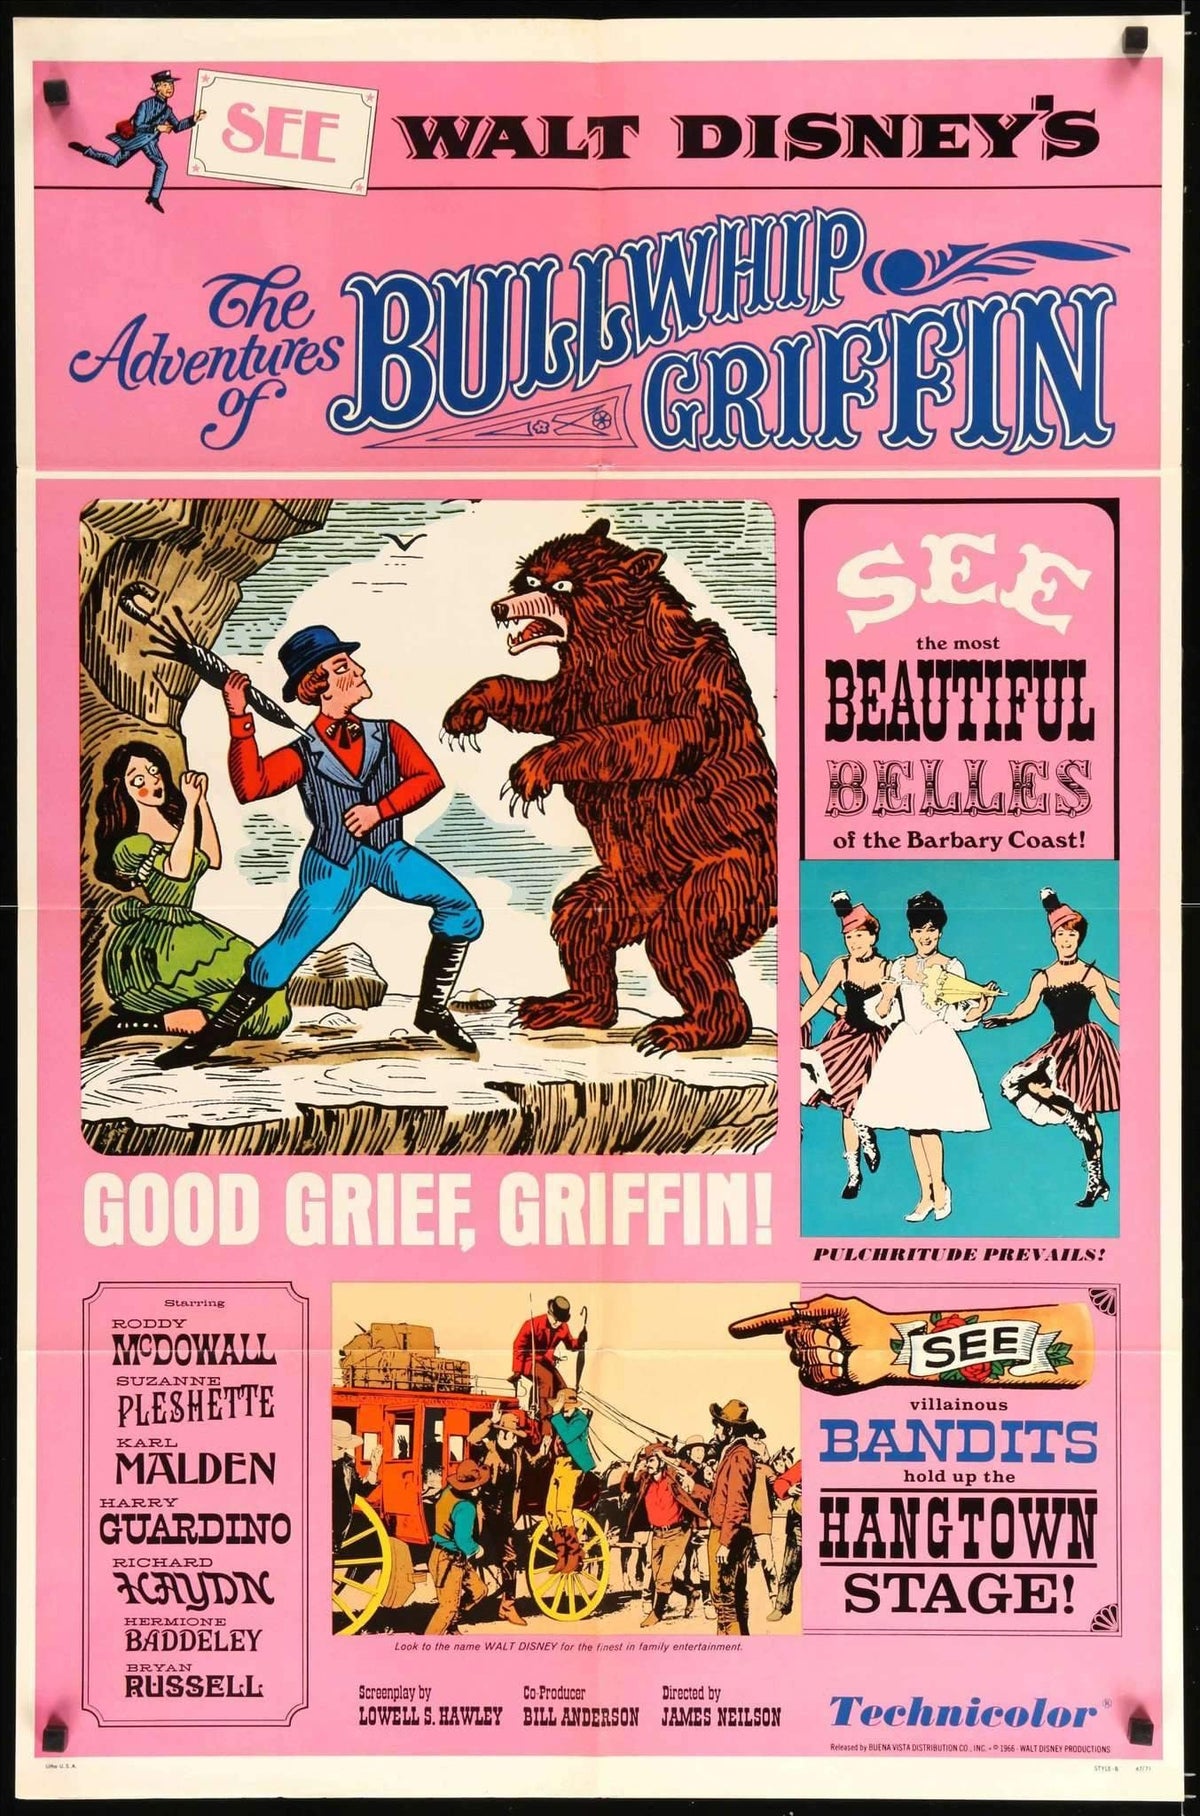 Adventures of Bullwhip Griffith (1967) original movie poster for sale at Original Film Art